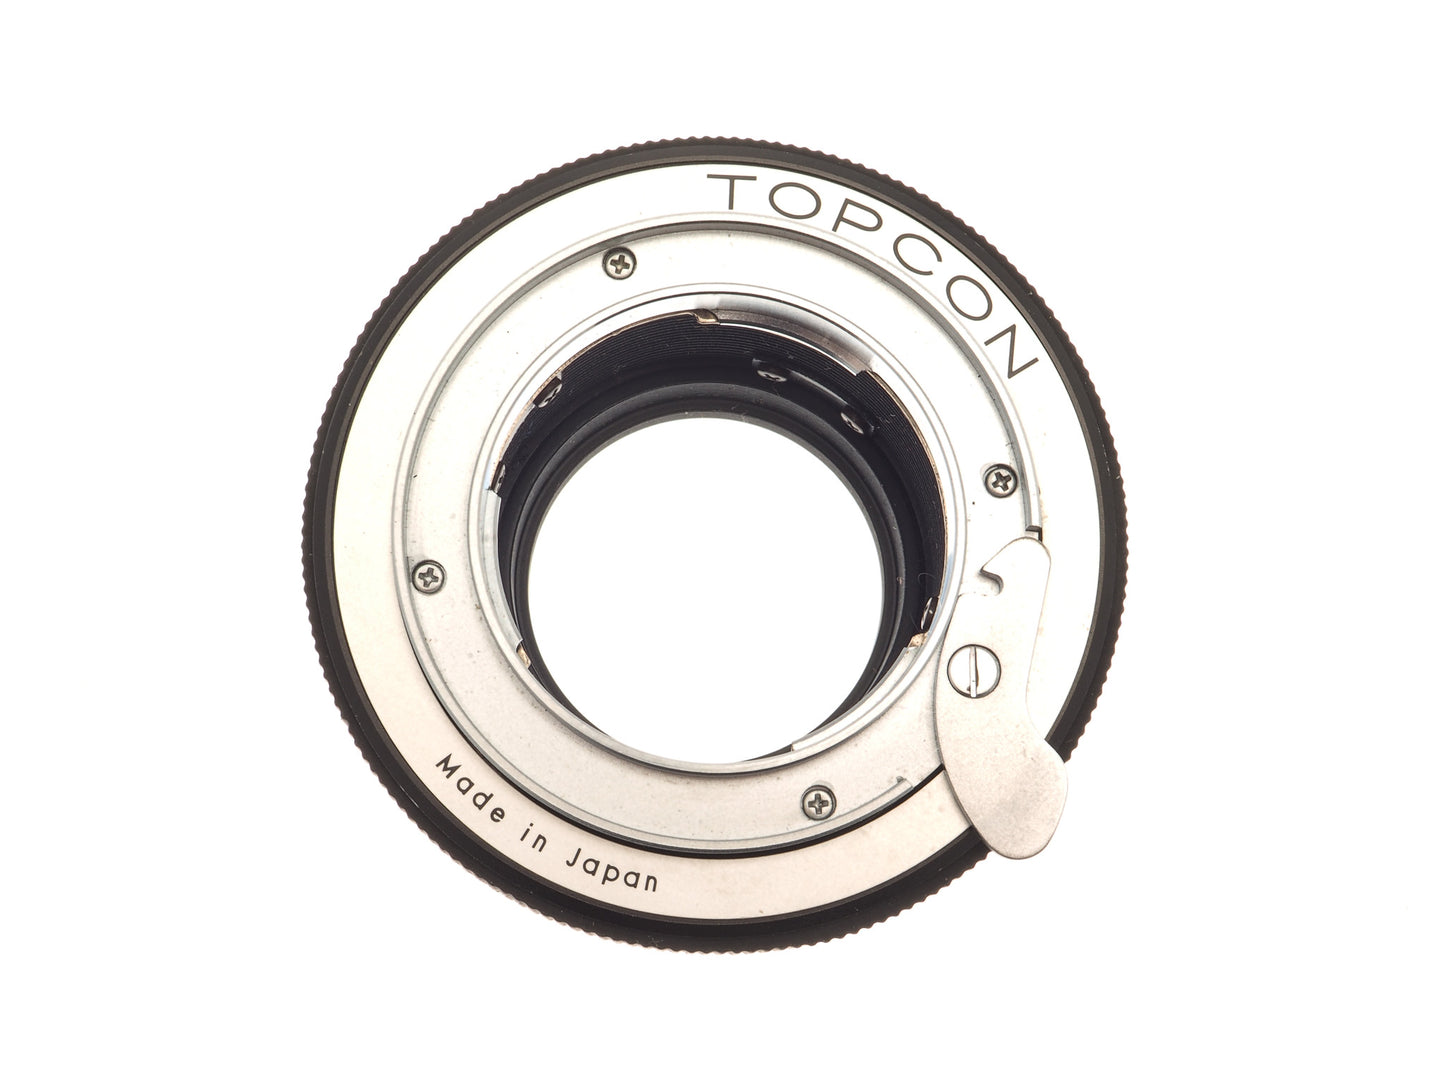 Topcon Variable Extension Tube - Accessory